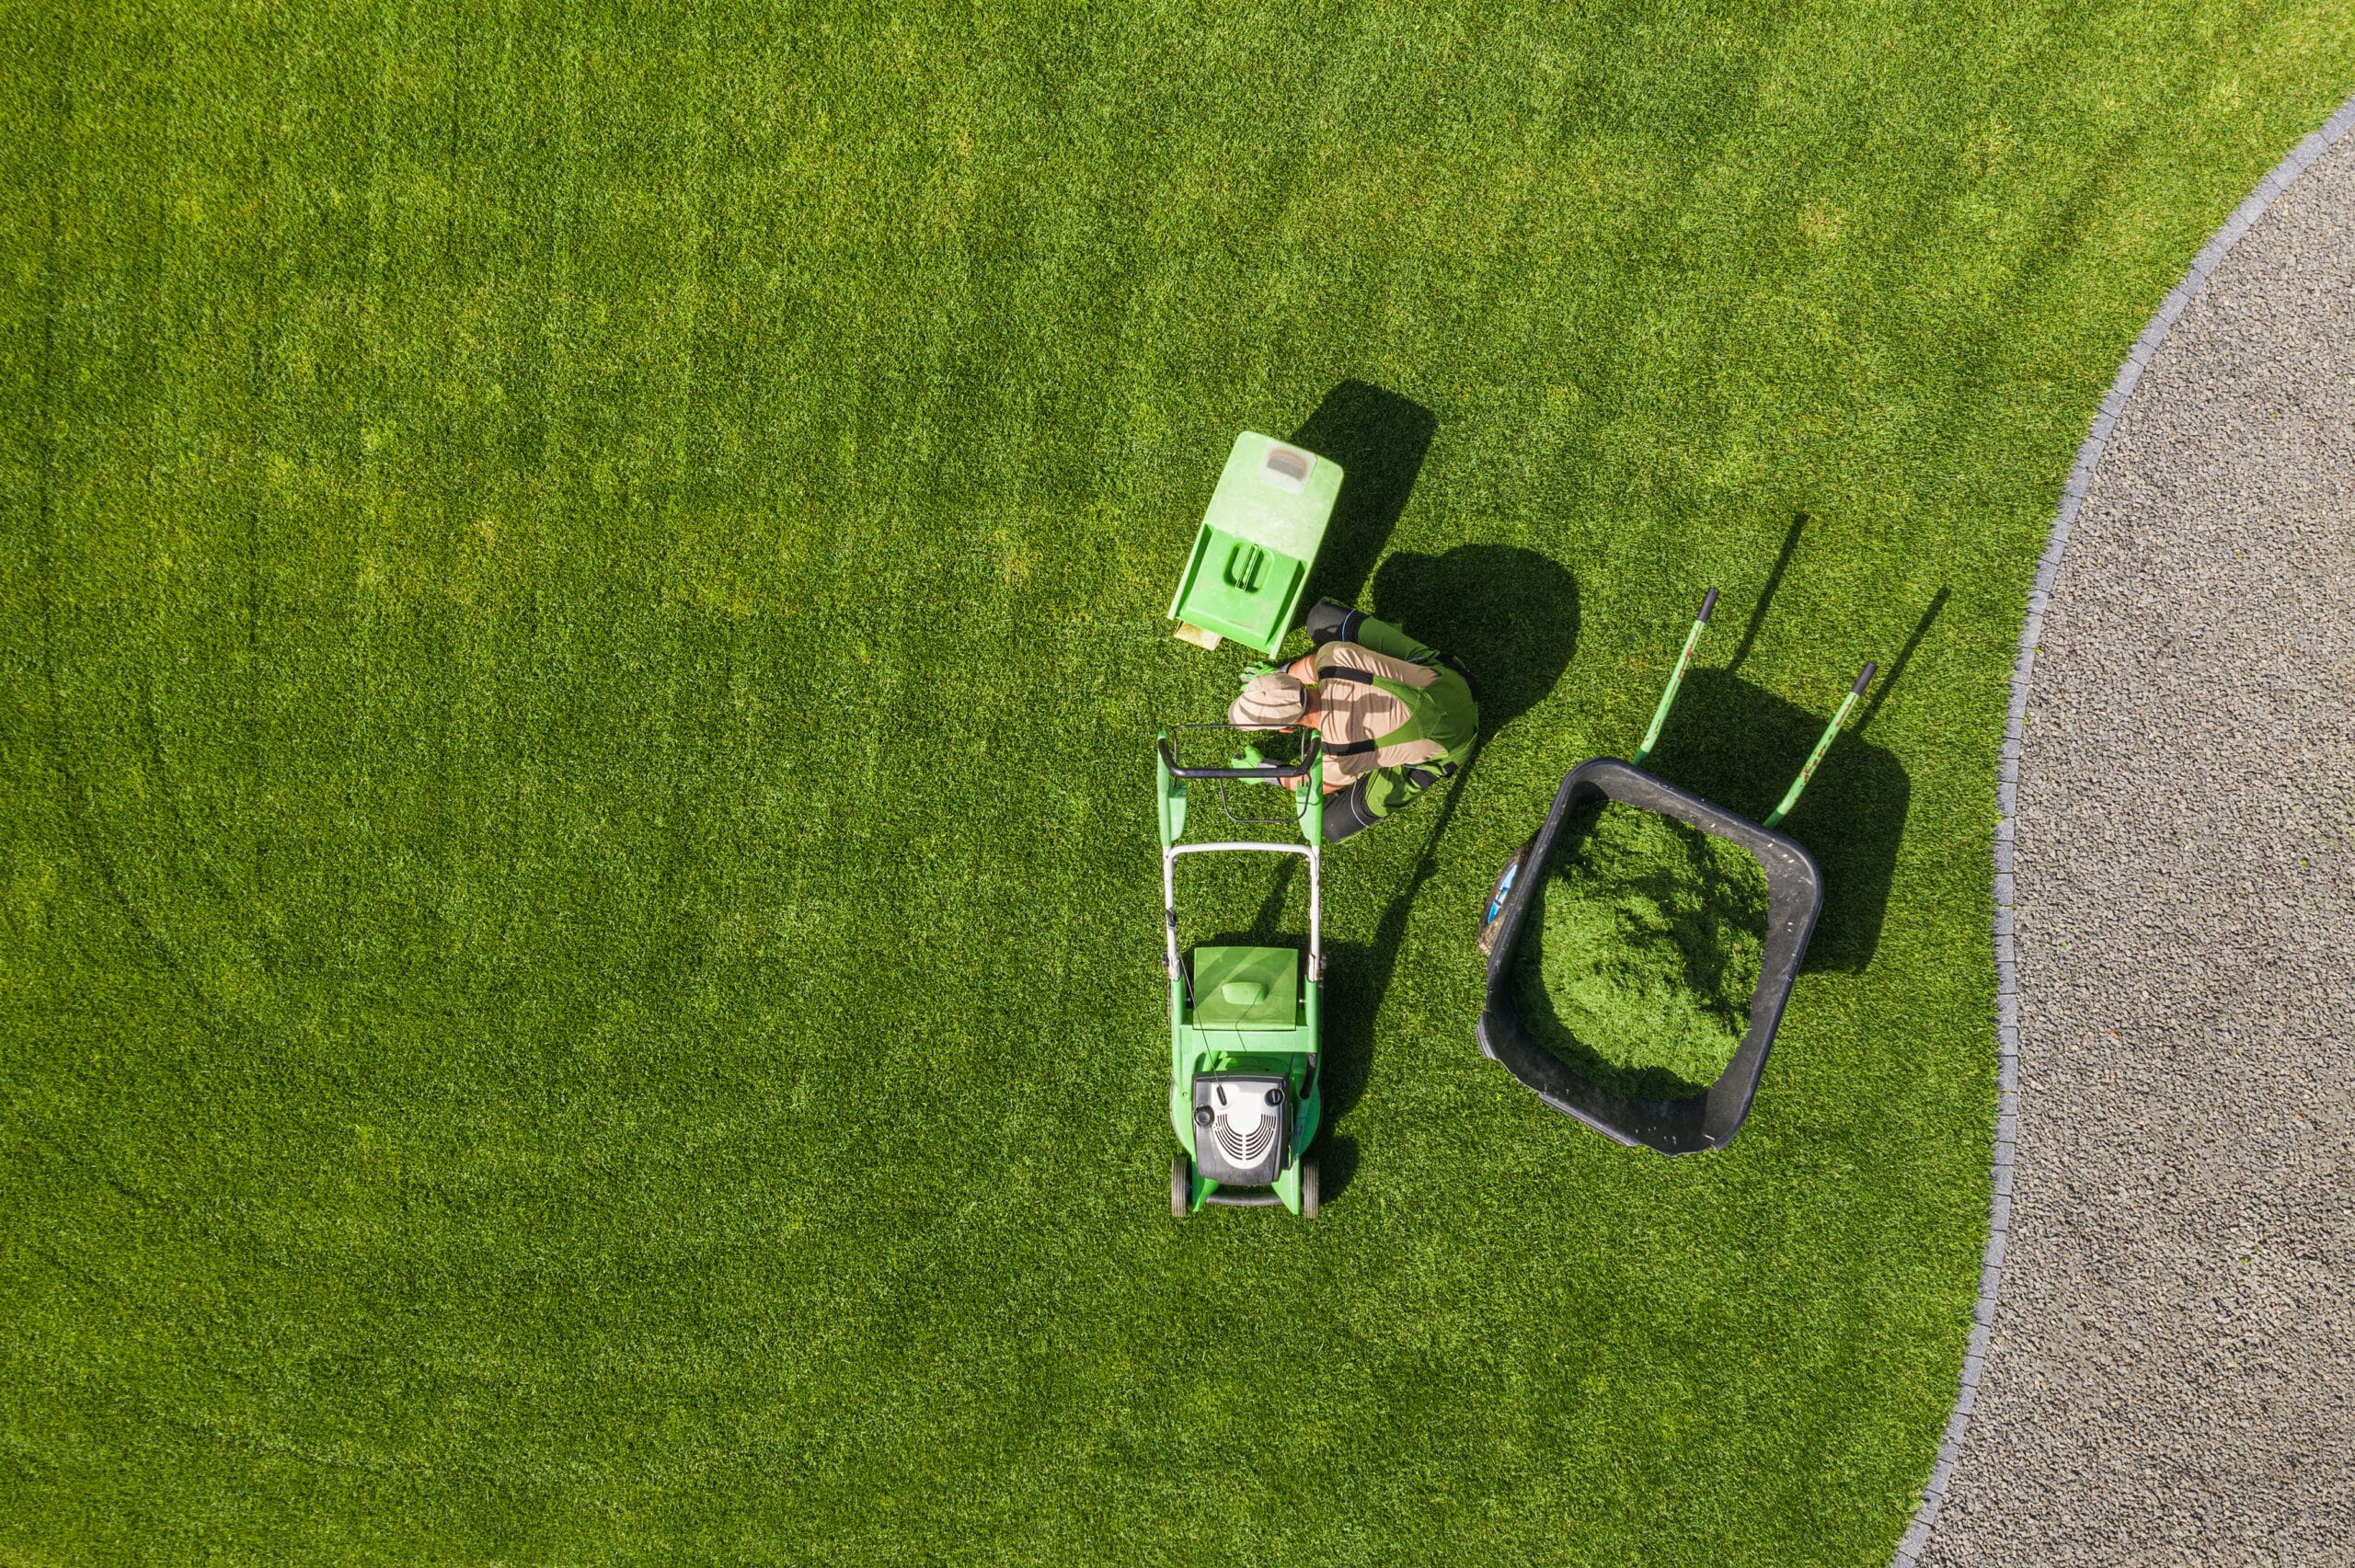 we incorporate lawn science into our lawn mowing